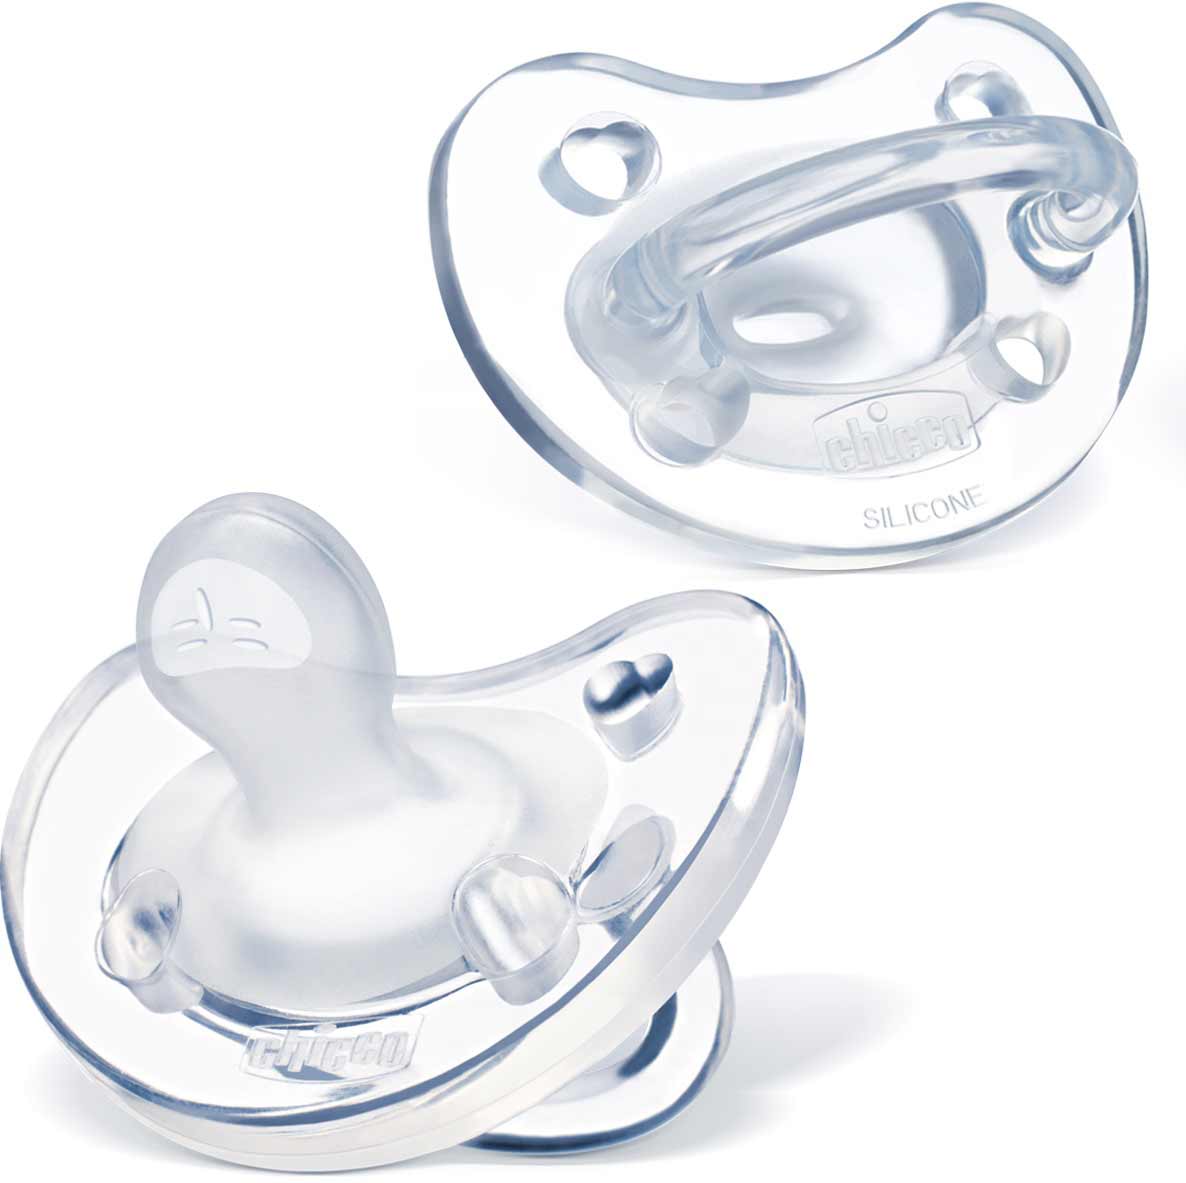 PhysioForma Orthdontic Pacifiers